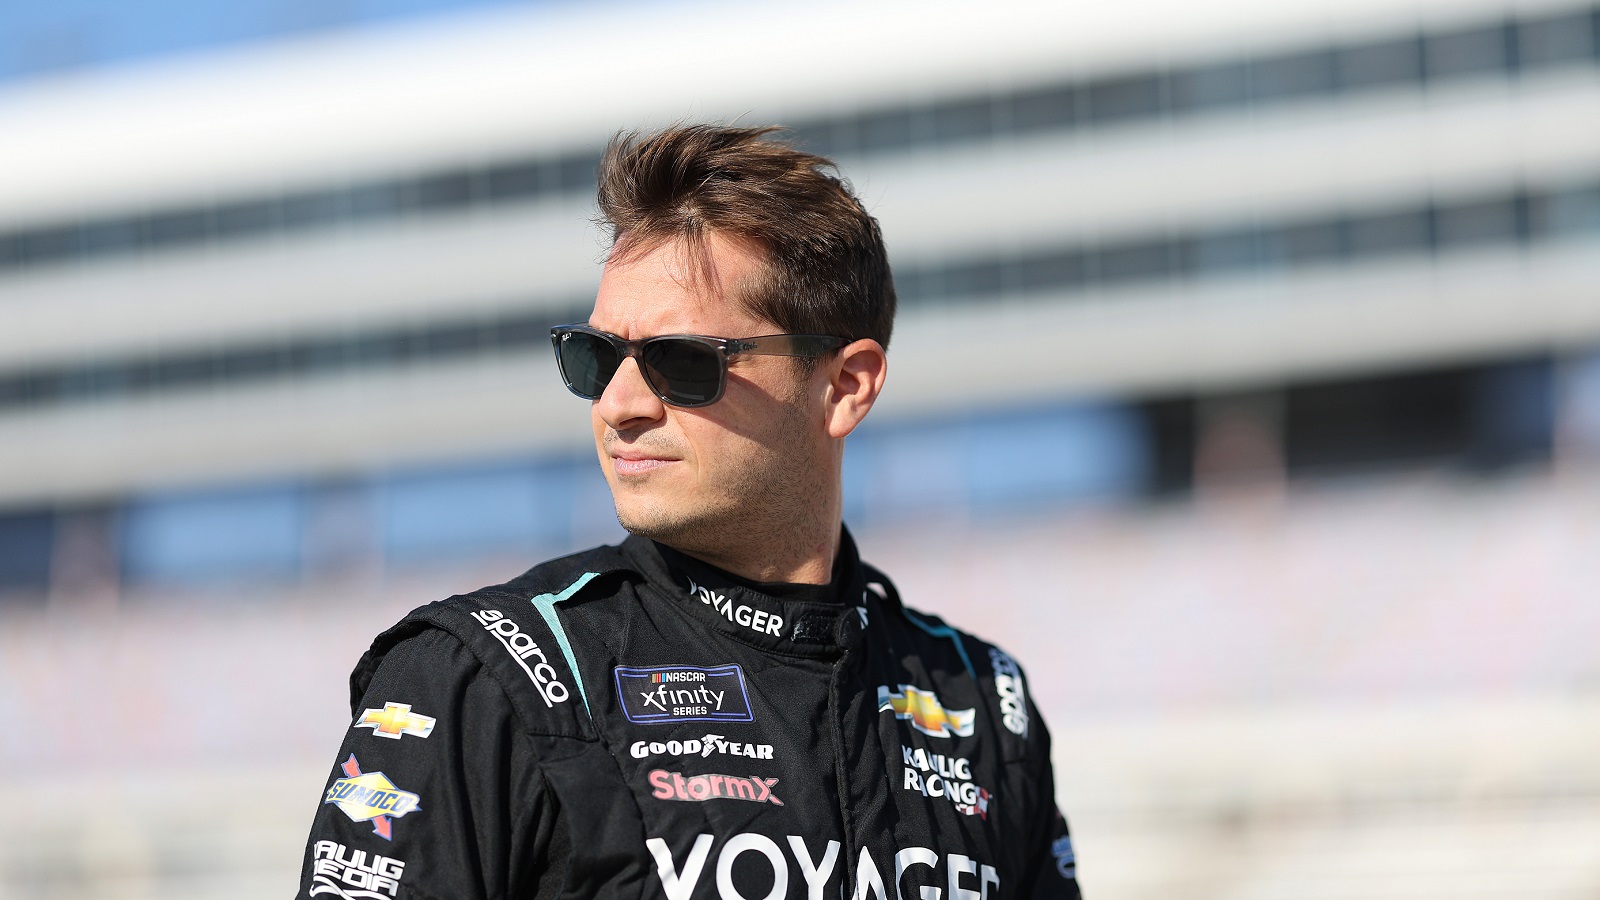 Landon Cassill walks the grid during practice for the NASCAR Xfinity Series Andy's Frozen Custard 300 at Texas Motor Speedway on Sept. 24, 2022. | James Gilbert/Getty Images